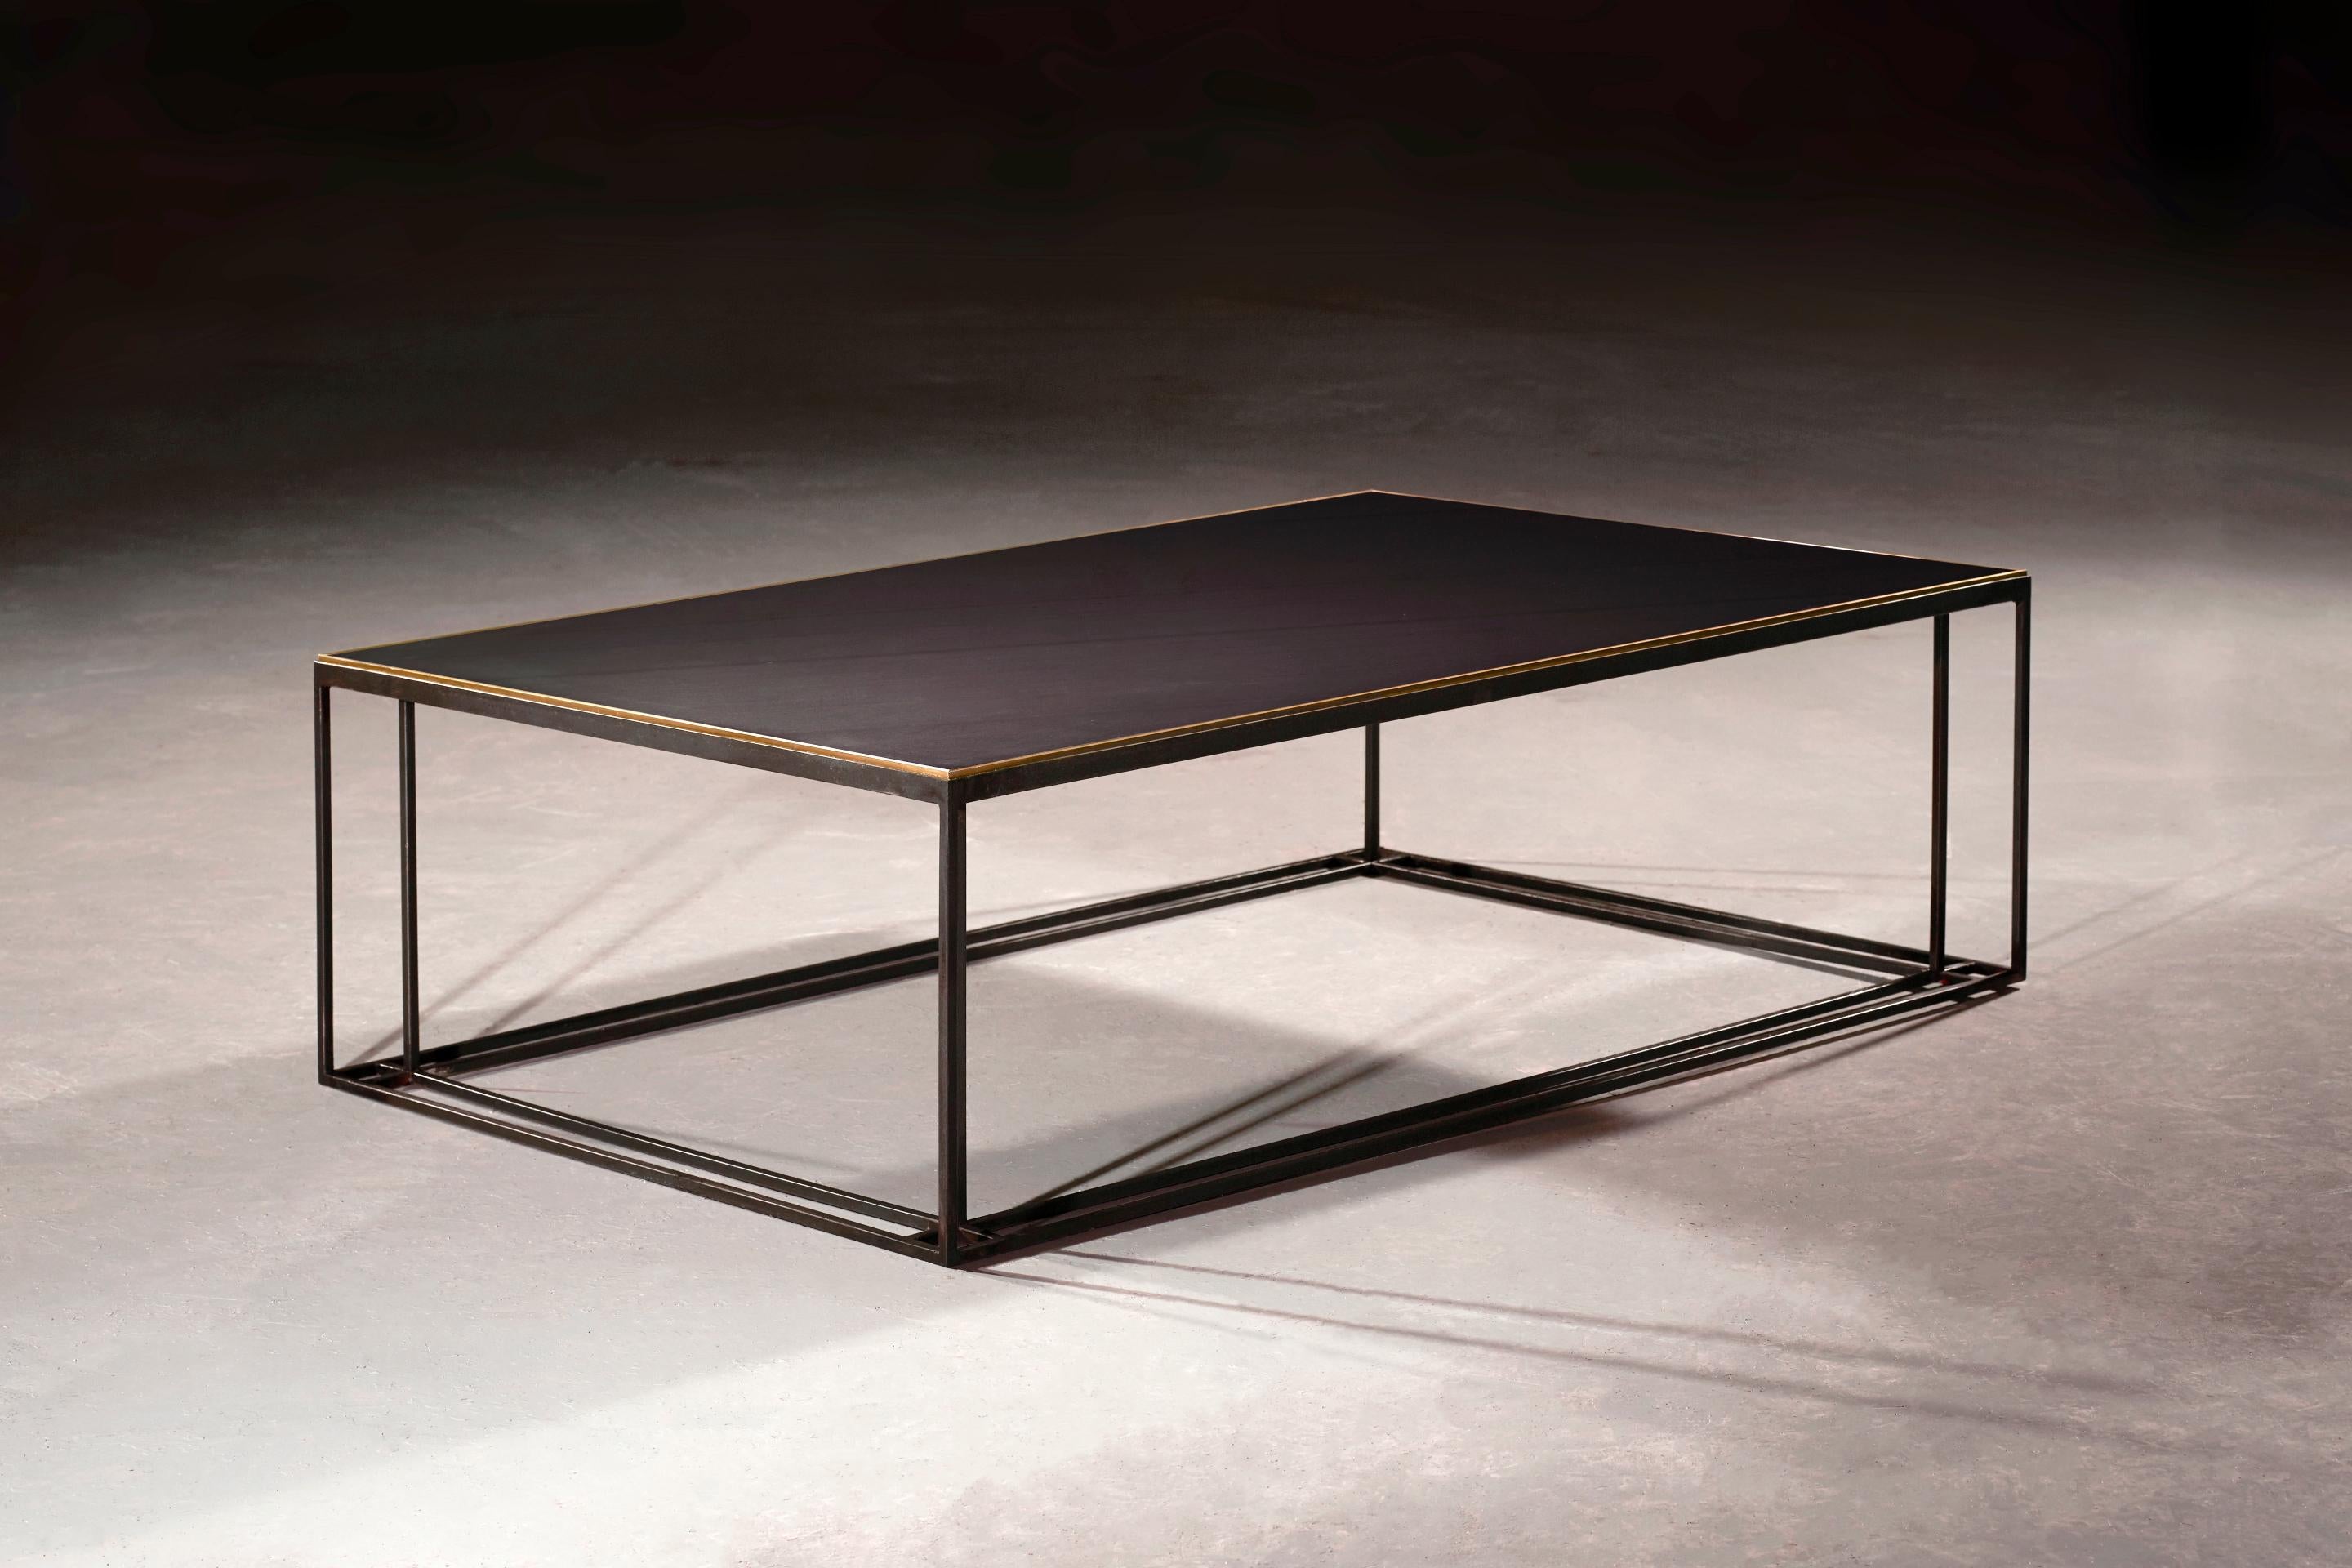 Slate handcrafted coffee table and signed by Novocastrian
Materials: Coffee table in blackened steel and honed Cumbrian slate.
Measures: 120cm (length) x 80cm (width) x 35cm (height).

Novocastrian

We are metalworkers, architects, welders, artists,